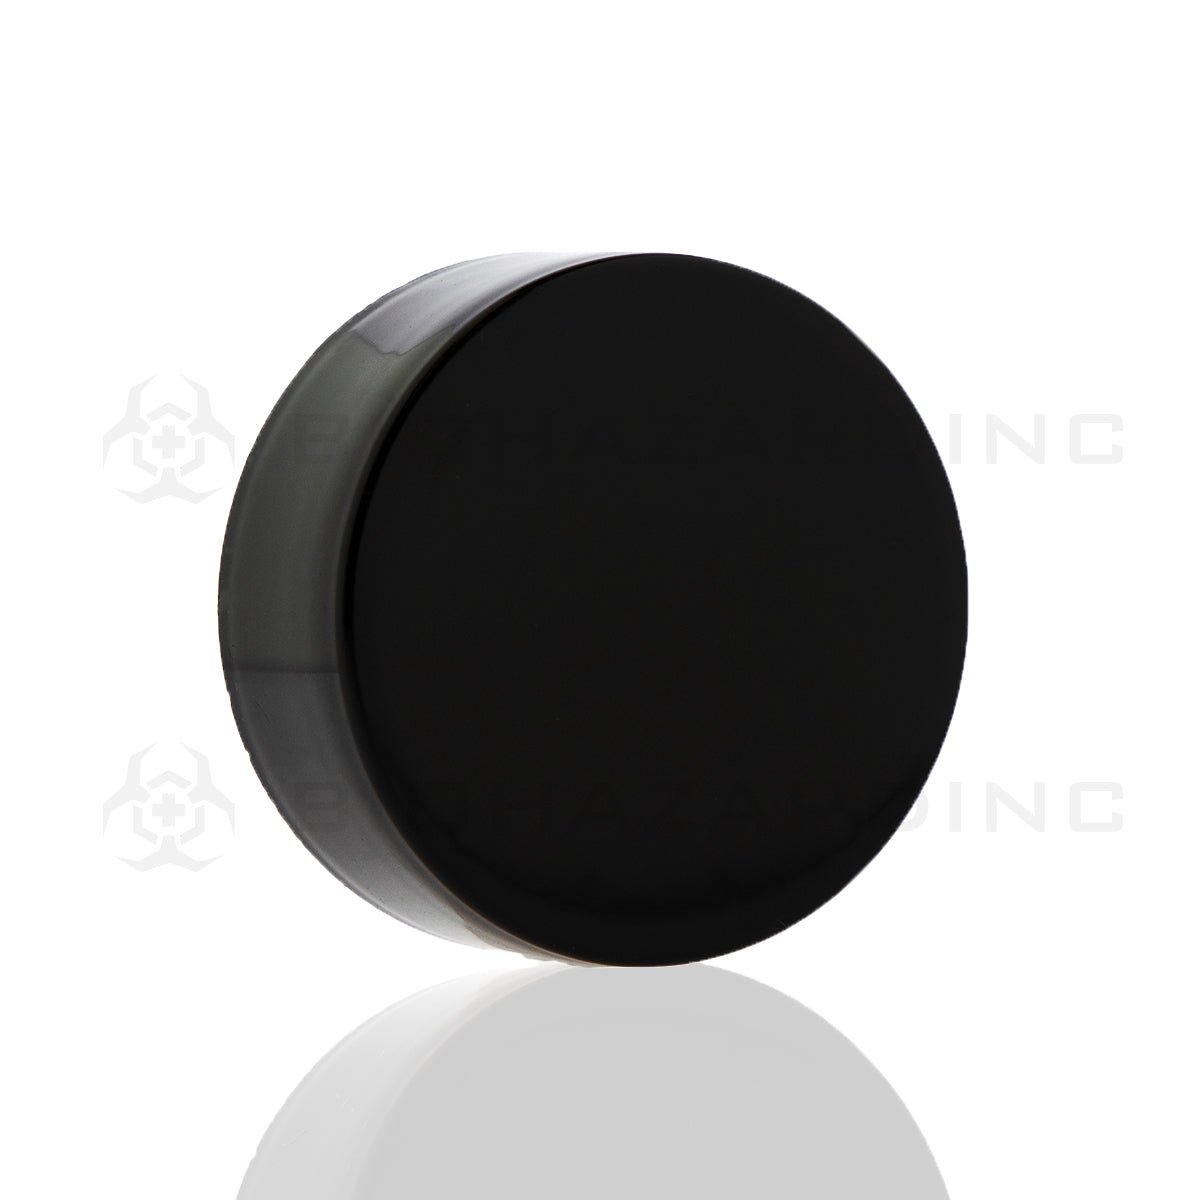 Child Resistant | Smooth Push Down & Turn Plastic Foil Lined Caps | 38mm - Gloss Black - 80 Count Child Resistant Cap Biohazard Inc   